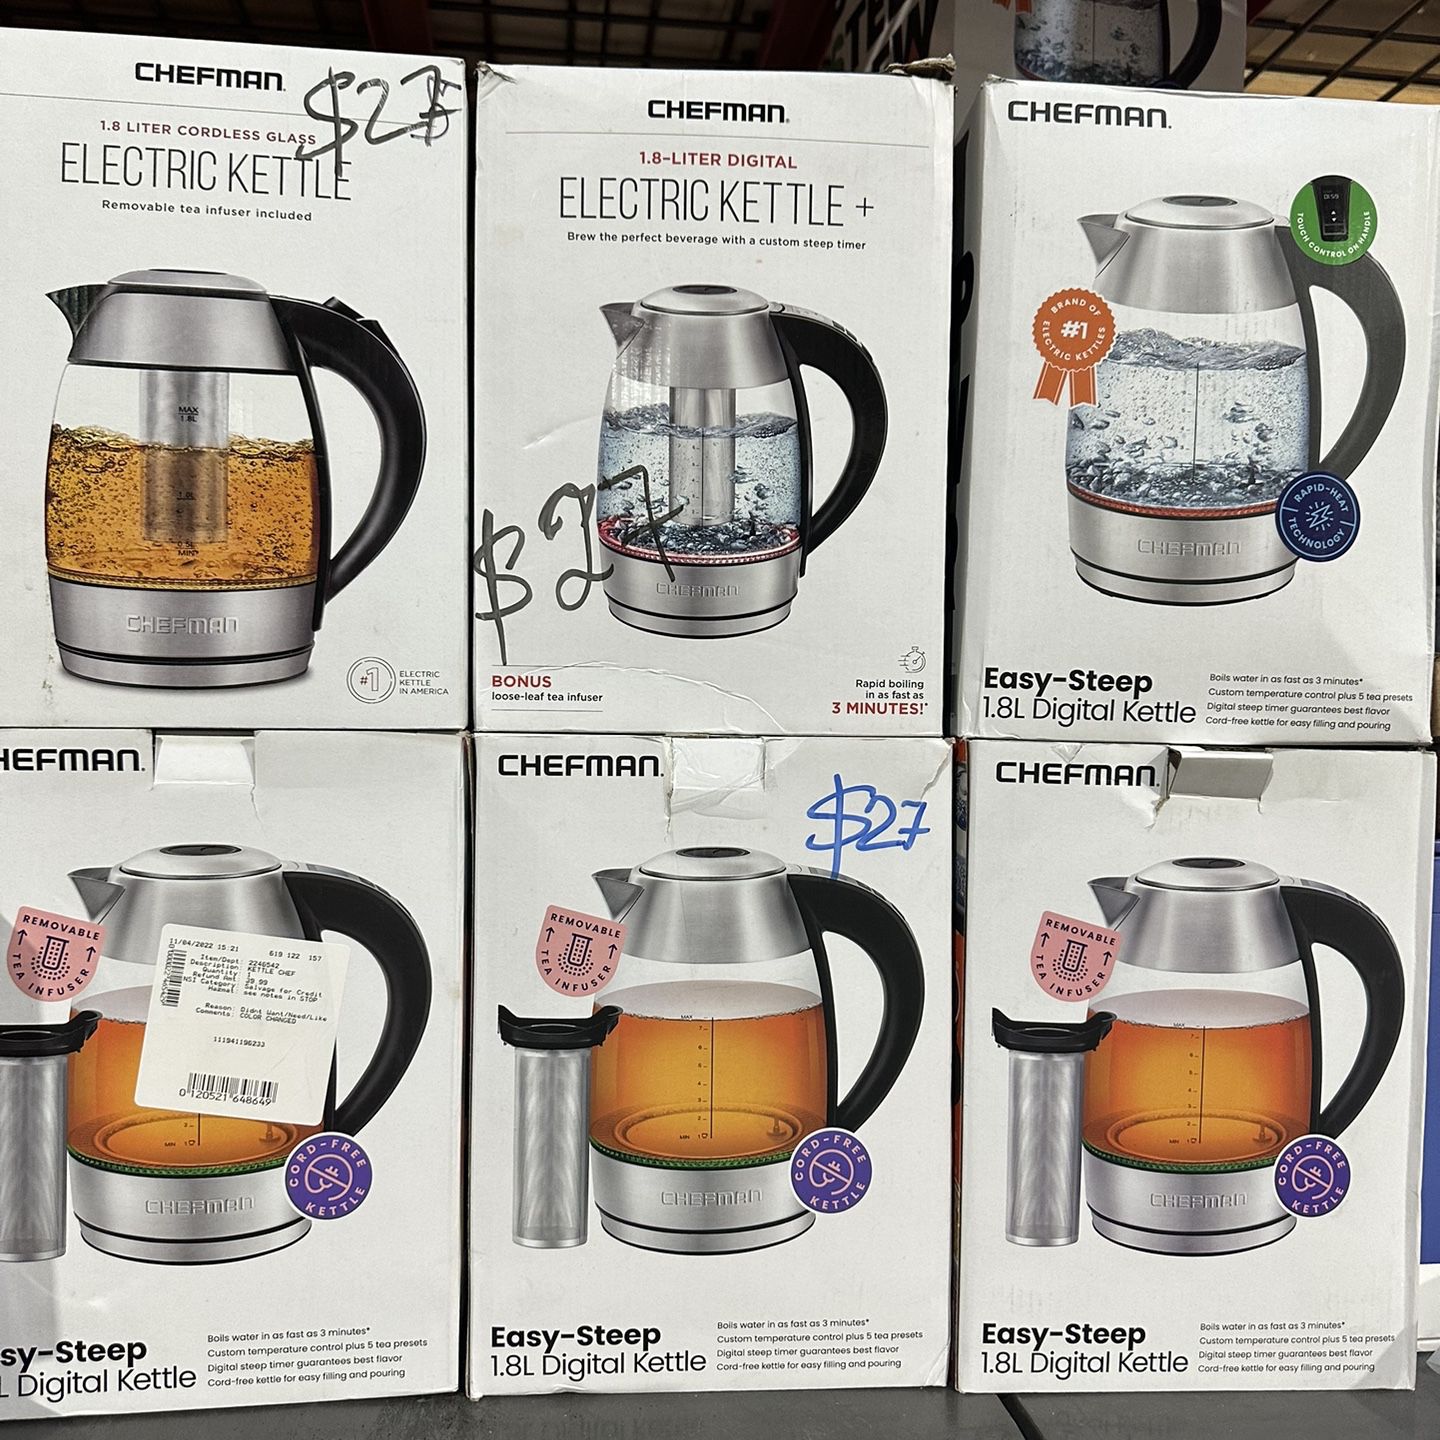 Cuisinart CPK-17 (CT) Programmable 1.7 LTR Electric Kettle Stainless Works  for Sale in San Antonio, TX - OfferUp